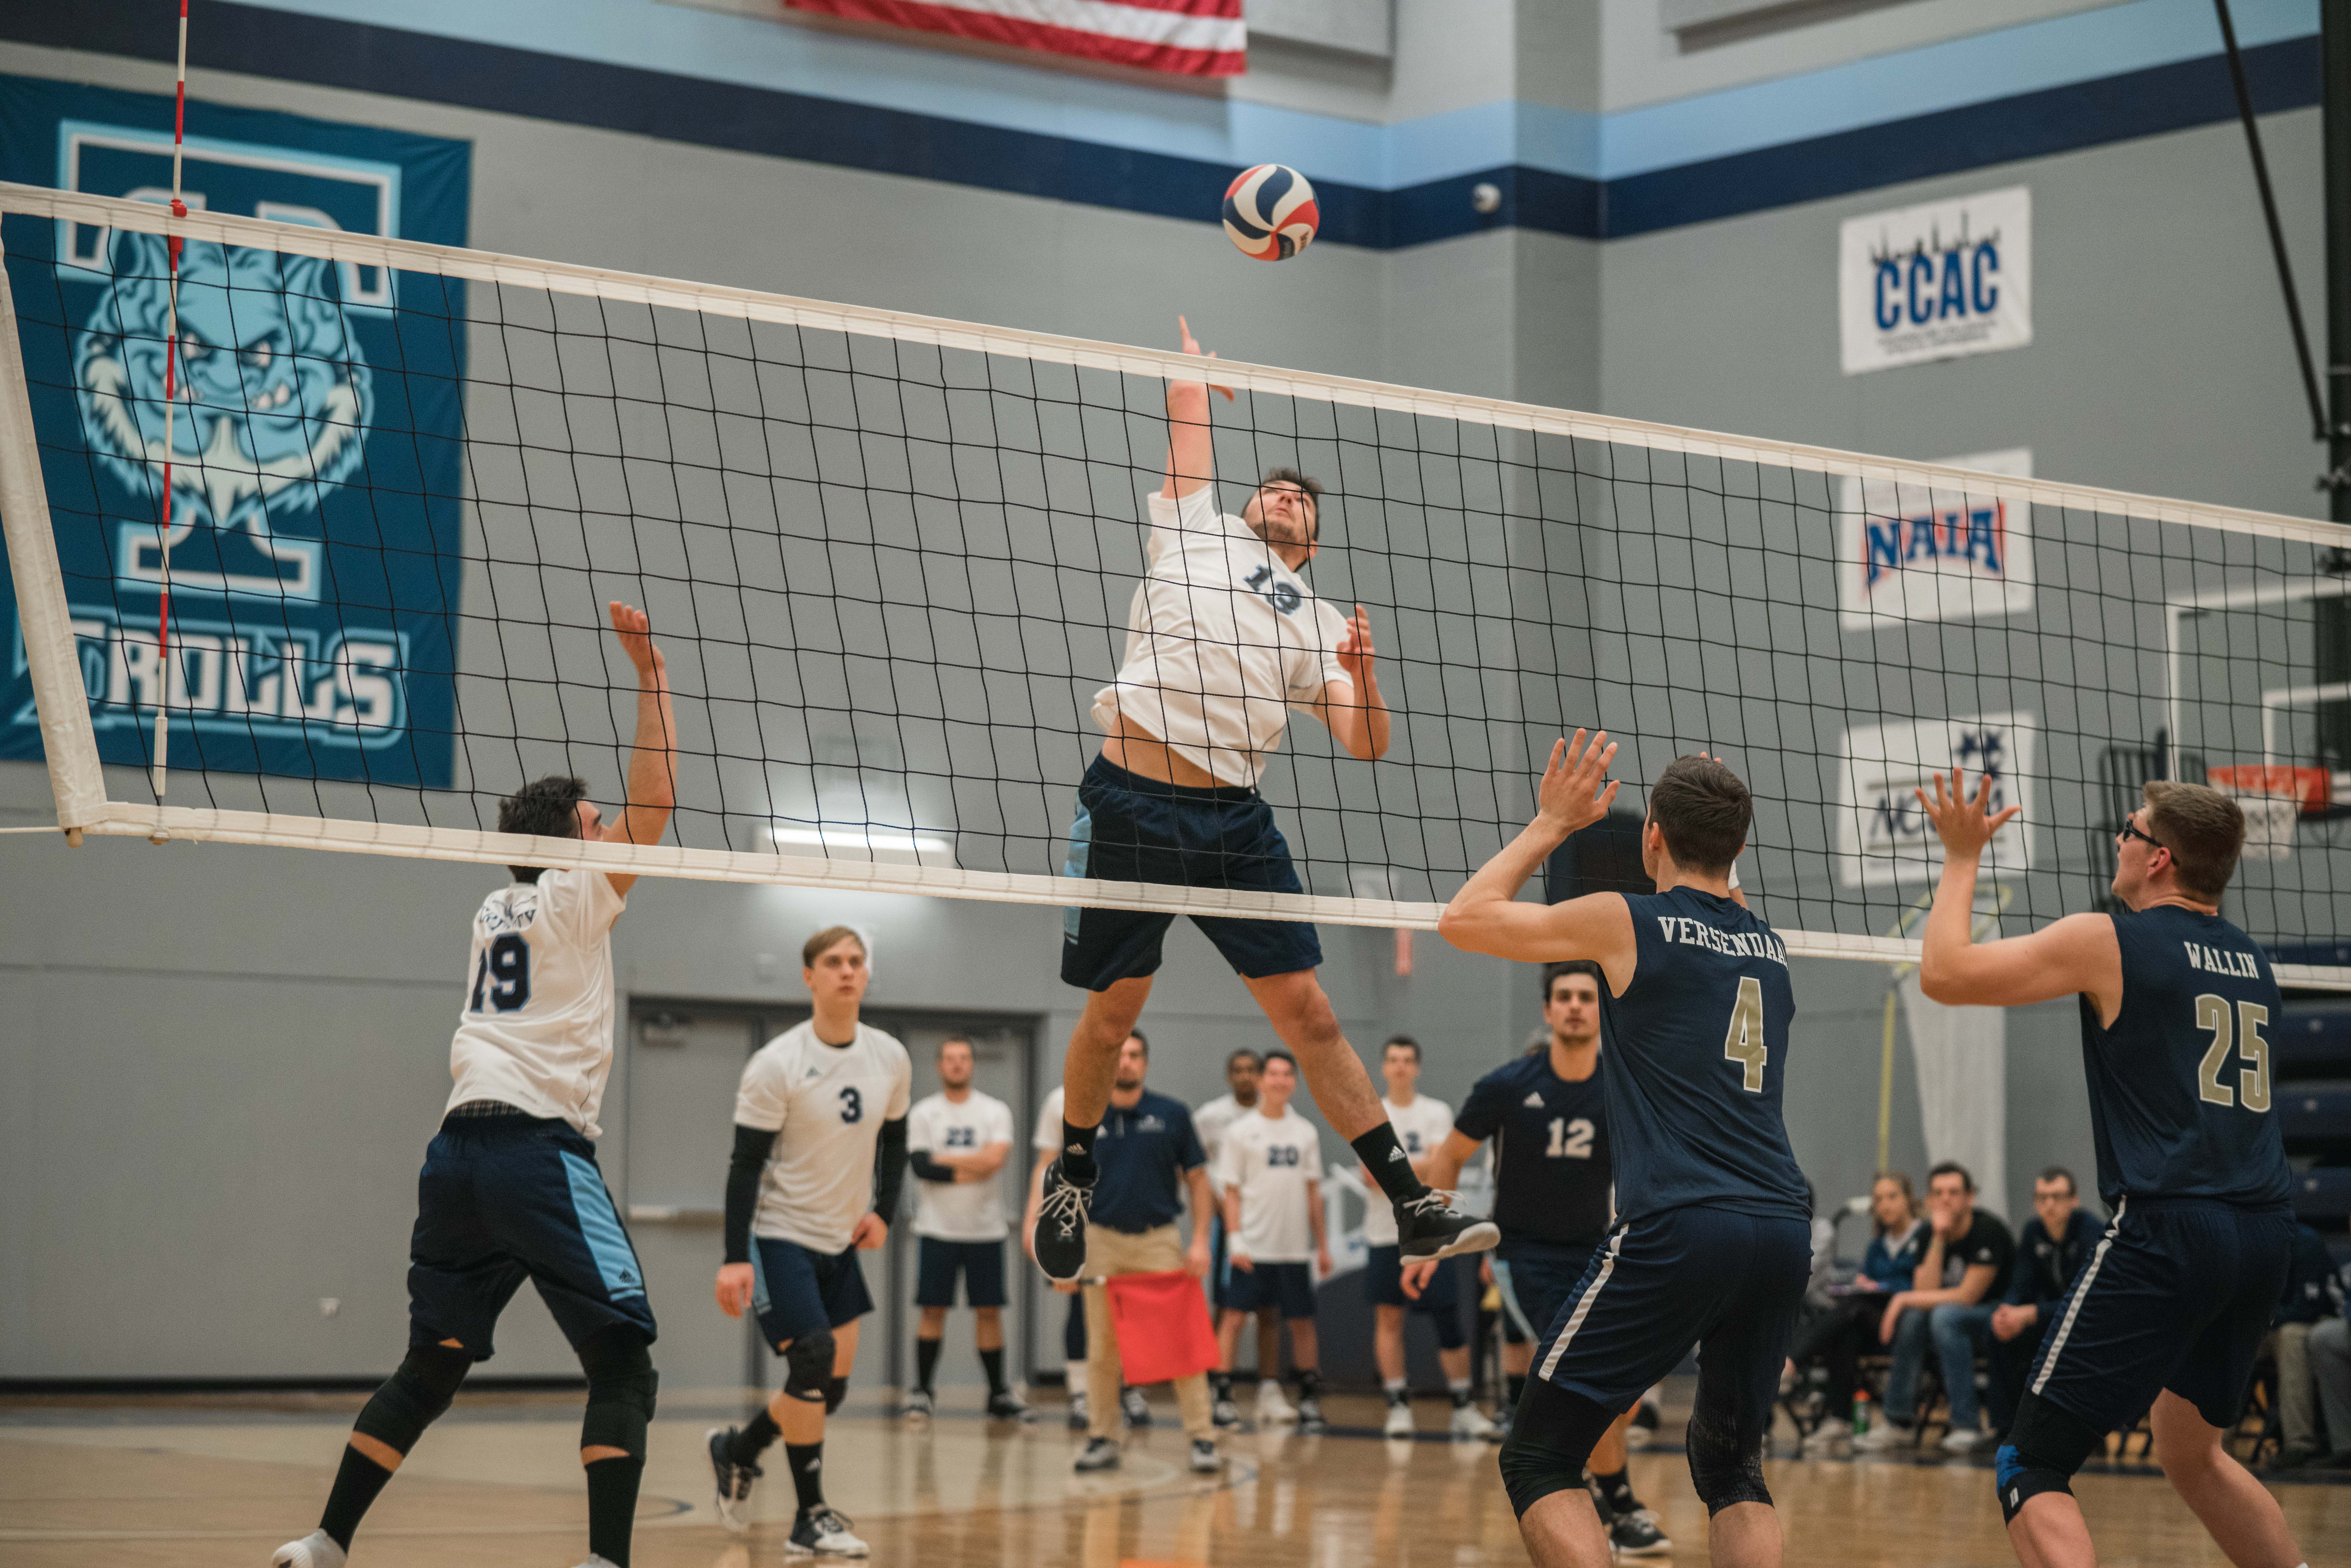 Trinity is excited to host the 2019 National Christian College Athletic Association (NCCAA) Men’s Volleyball National Invitational from January 25-26.